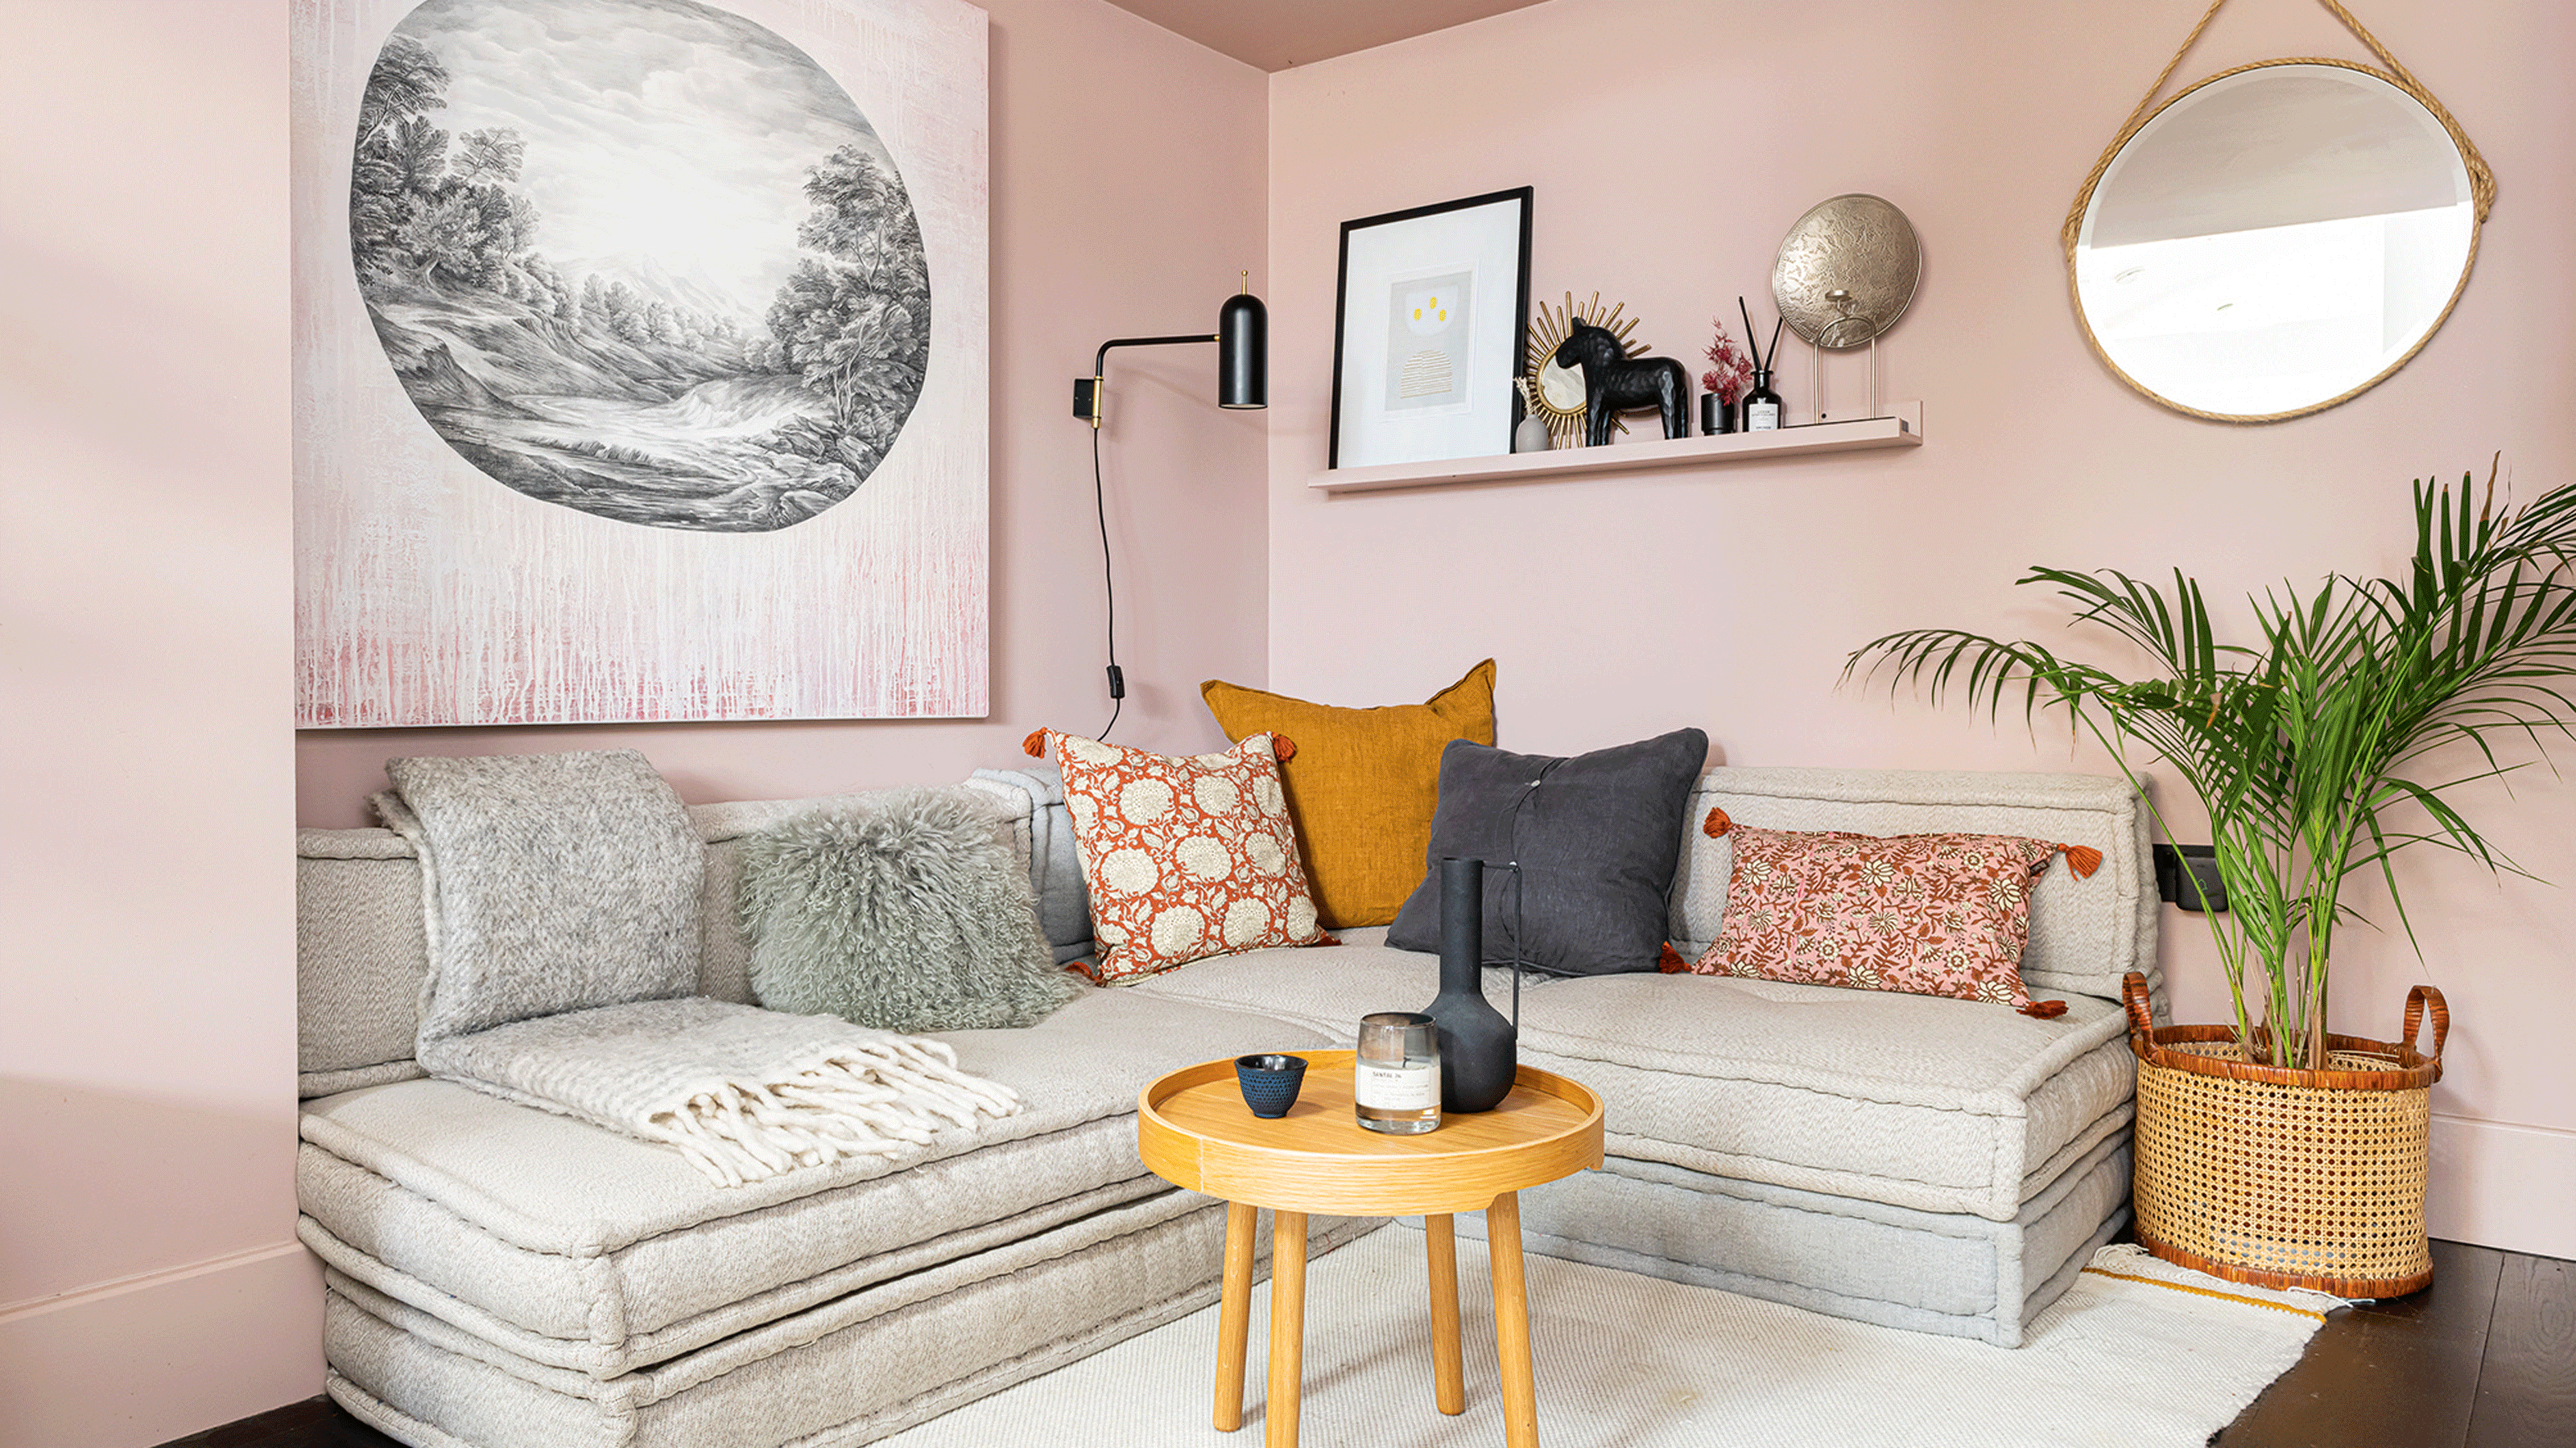 50 small living room ideas to maximise a tiny space | ideal home